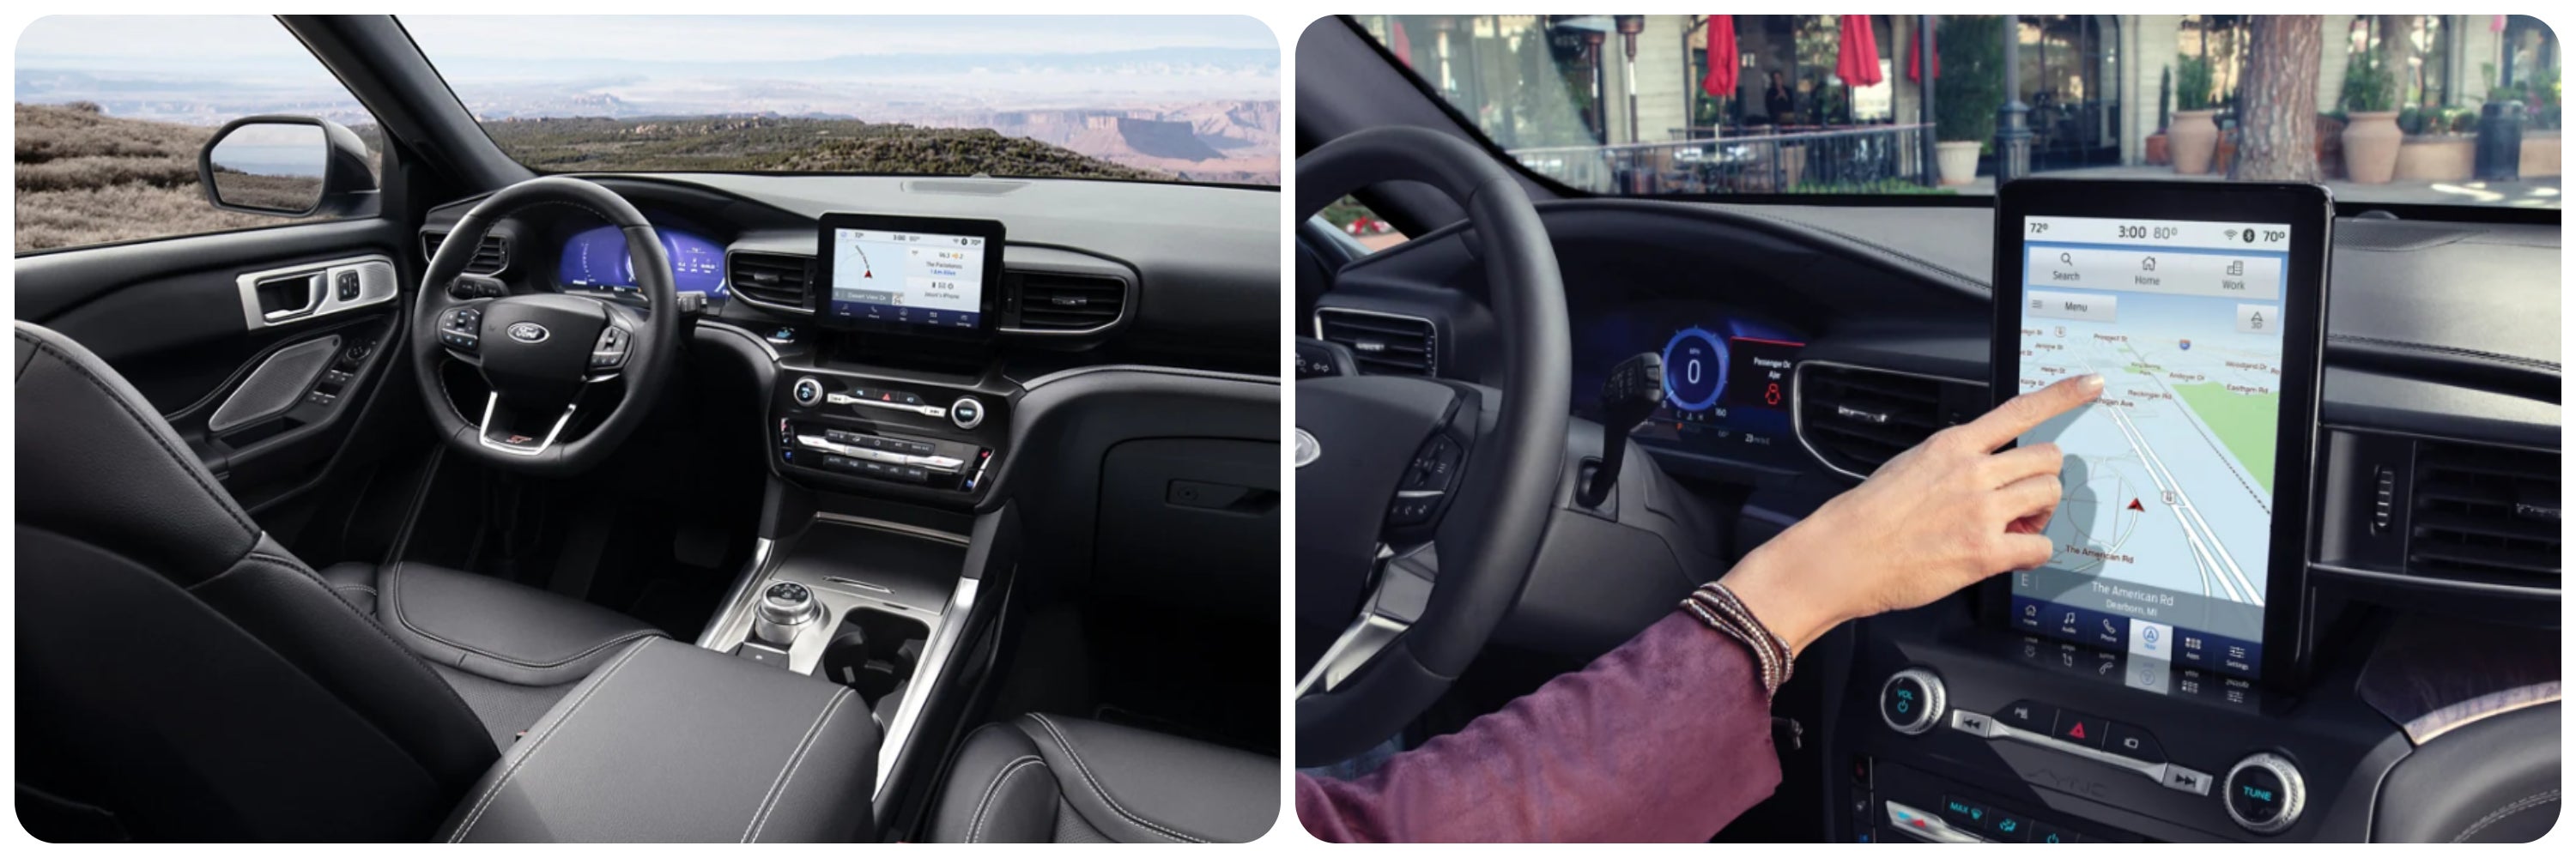 A view of the dash of the 2023 Ford Explorer on the left and the dash of the 2022 Ford Explorer on the right.